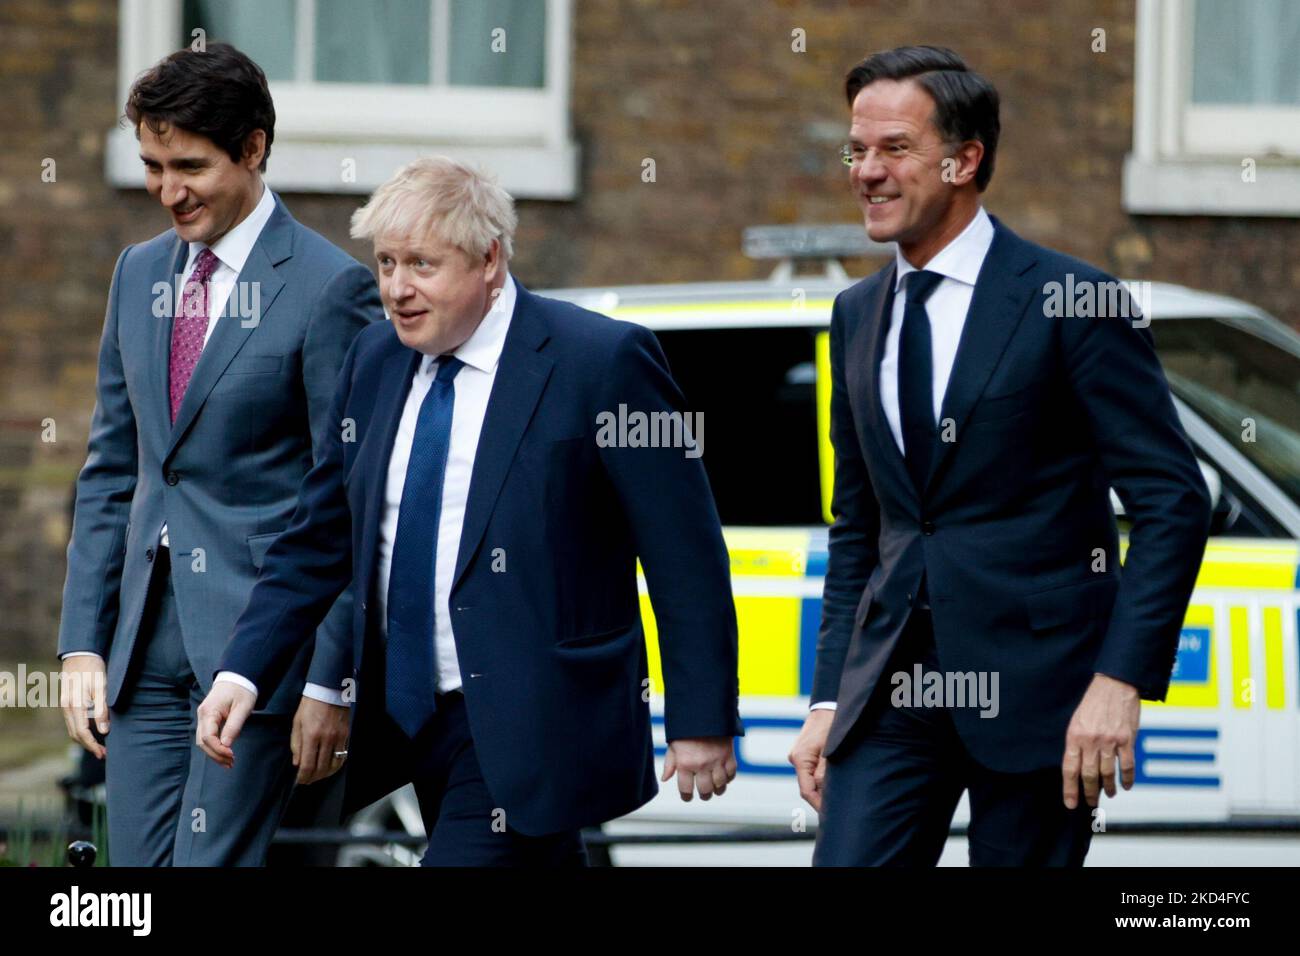 British Prime Minister Boris Johnson (C), Prime Minister of the Netherlands Mark Rutte (R) and Canadian Prime Minister Justin Trudeau (L) leave a joint press conference on the situation in Ukraine held in the Downing Street press briefing room in London, England, on March 7, 2022. (Photo by David Cliff/NurPhoto) Stock Photo